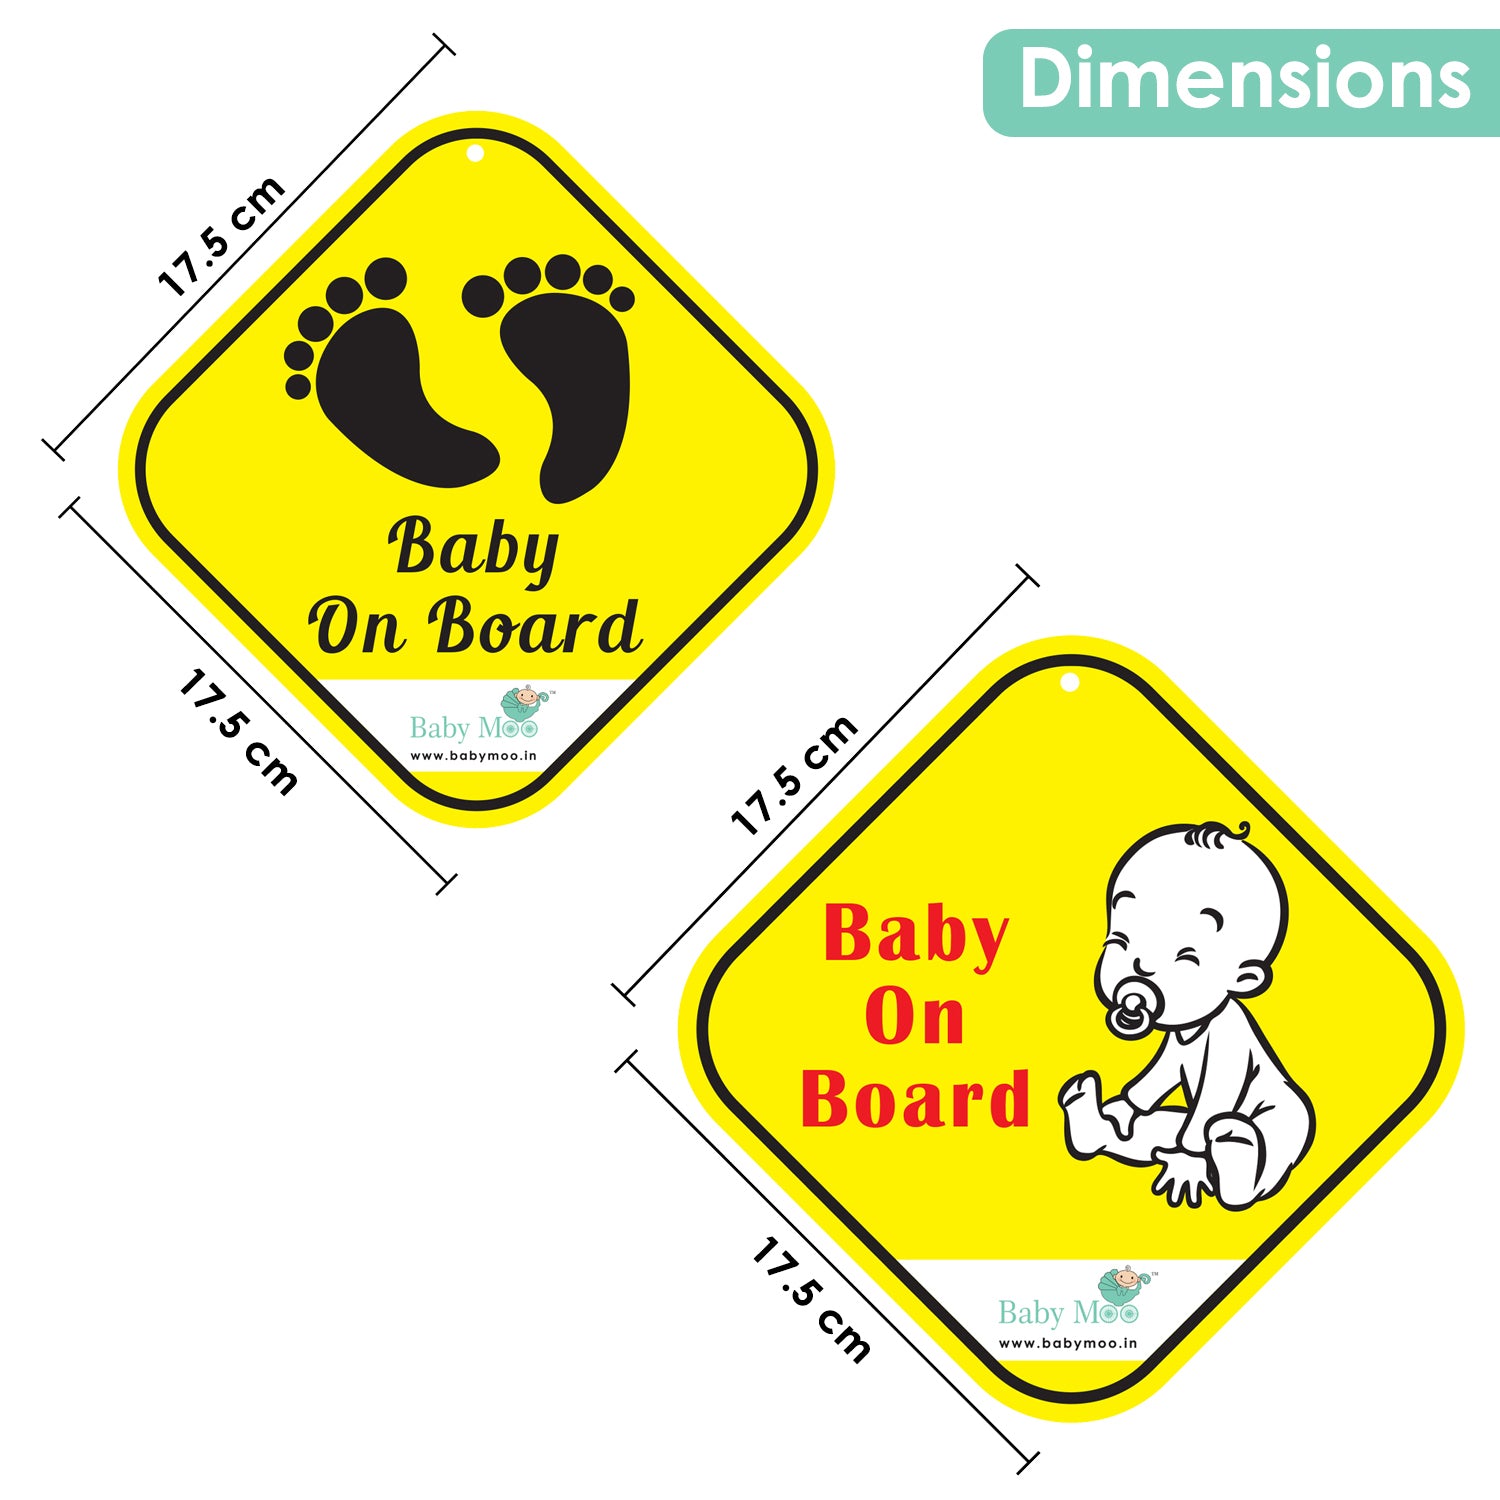 Baby Moo Tiny Baby On Board Car Safety Sign With Suction Cup Clip 2 Pack - Yellow - Baby Moo